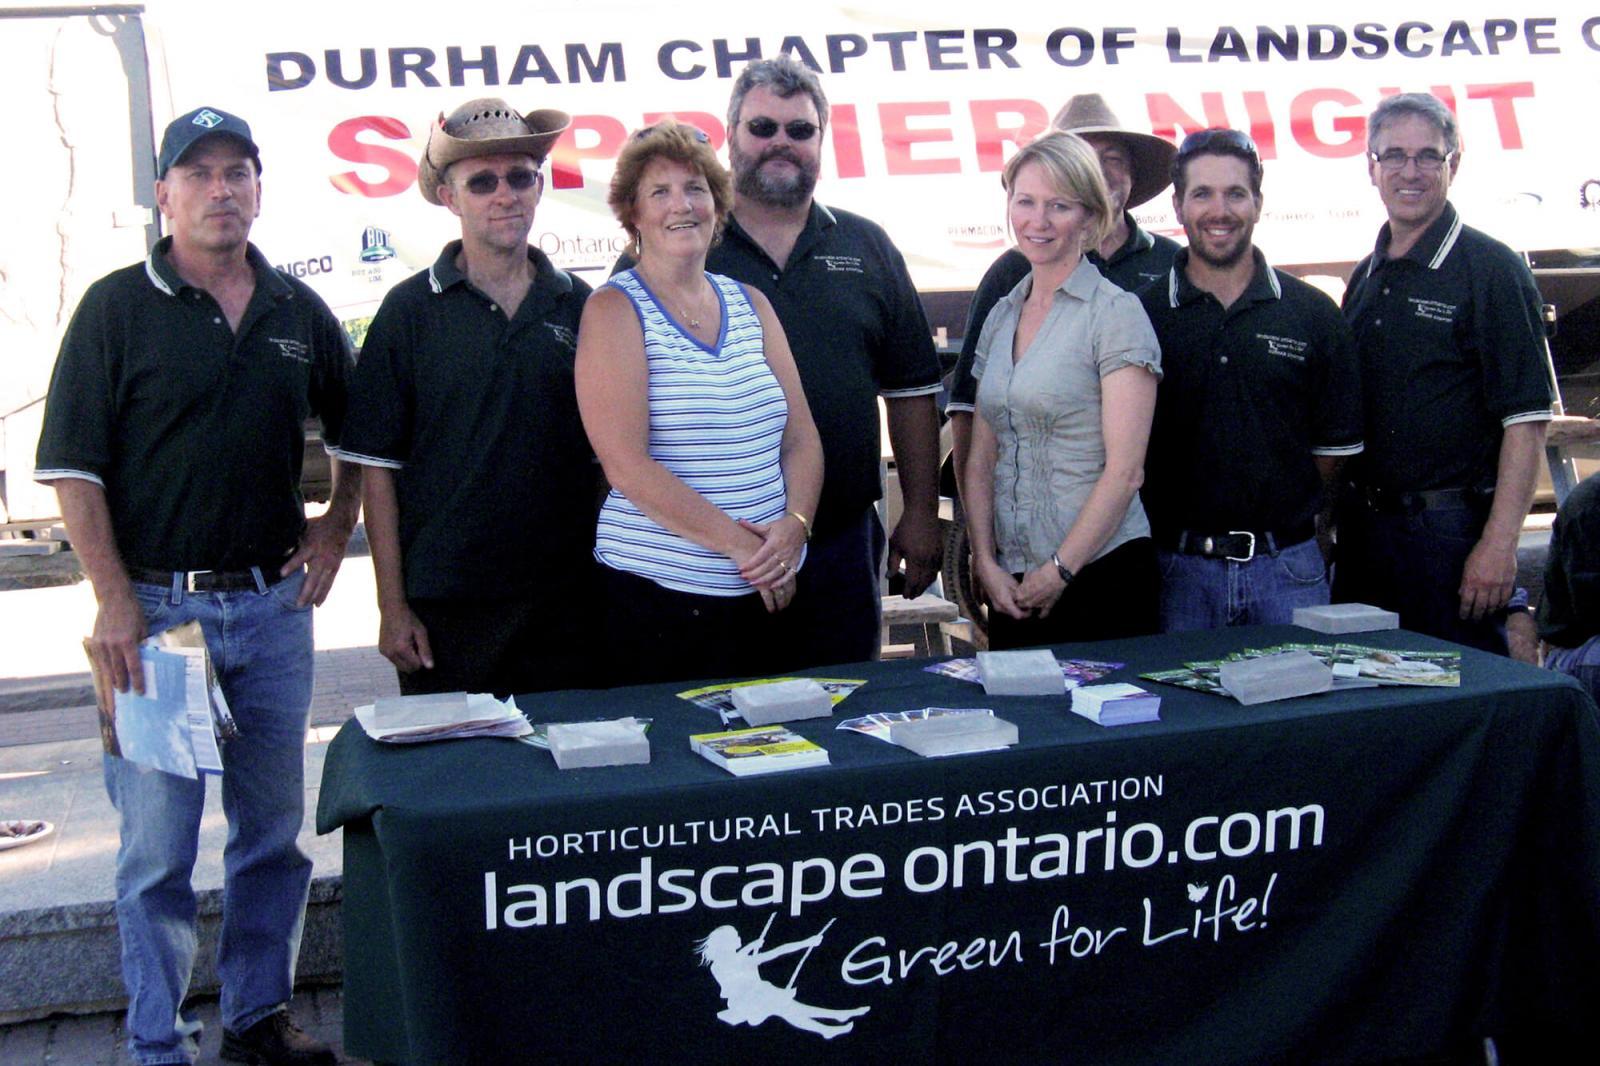 Members of Durham Chapter were pleased to see a great turnout at the fourth annual supplier night barbecue.